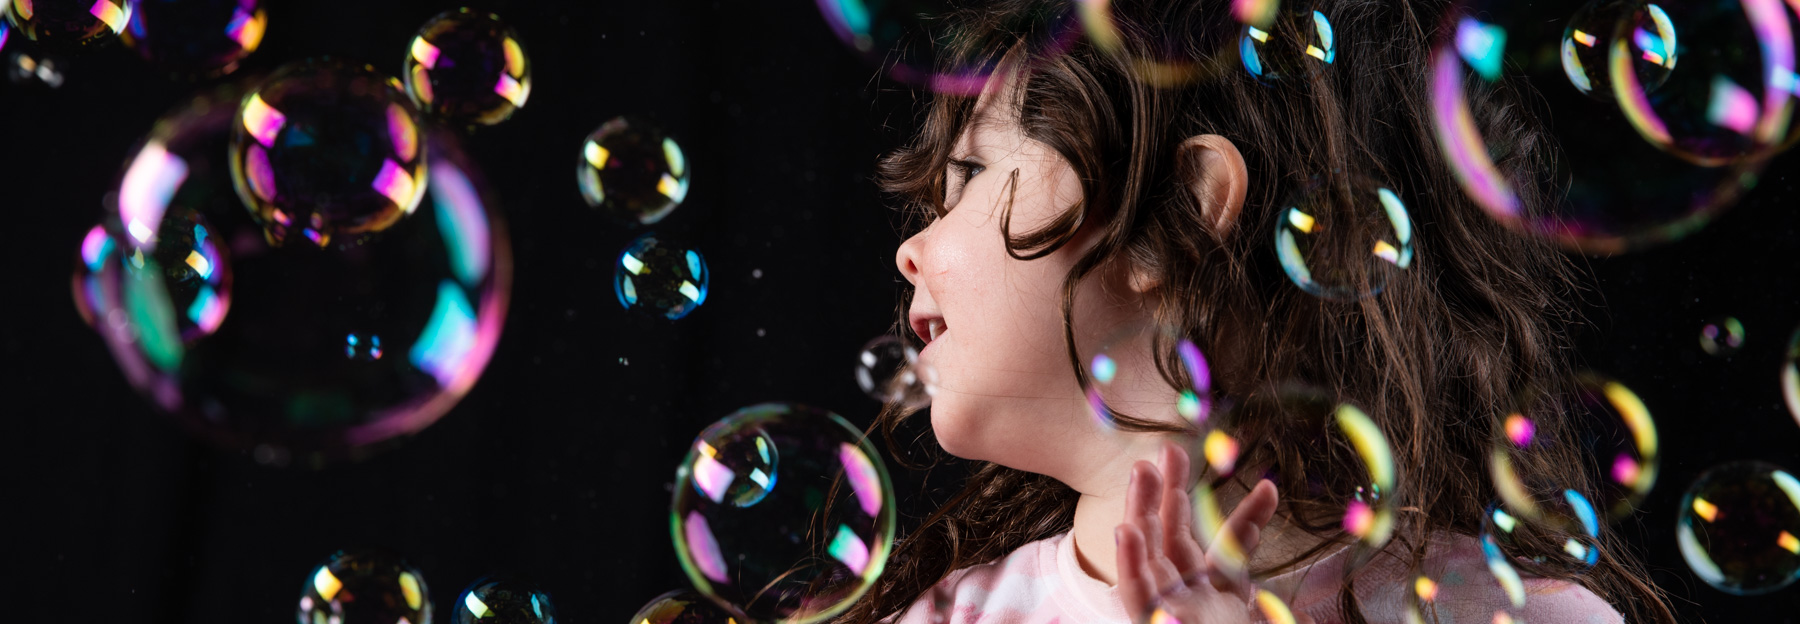 girl in studio surrounded by bubbles